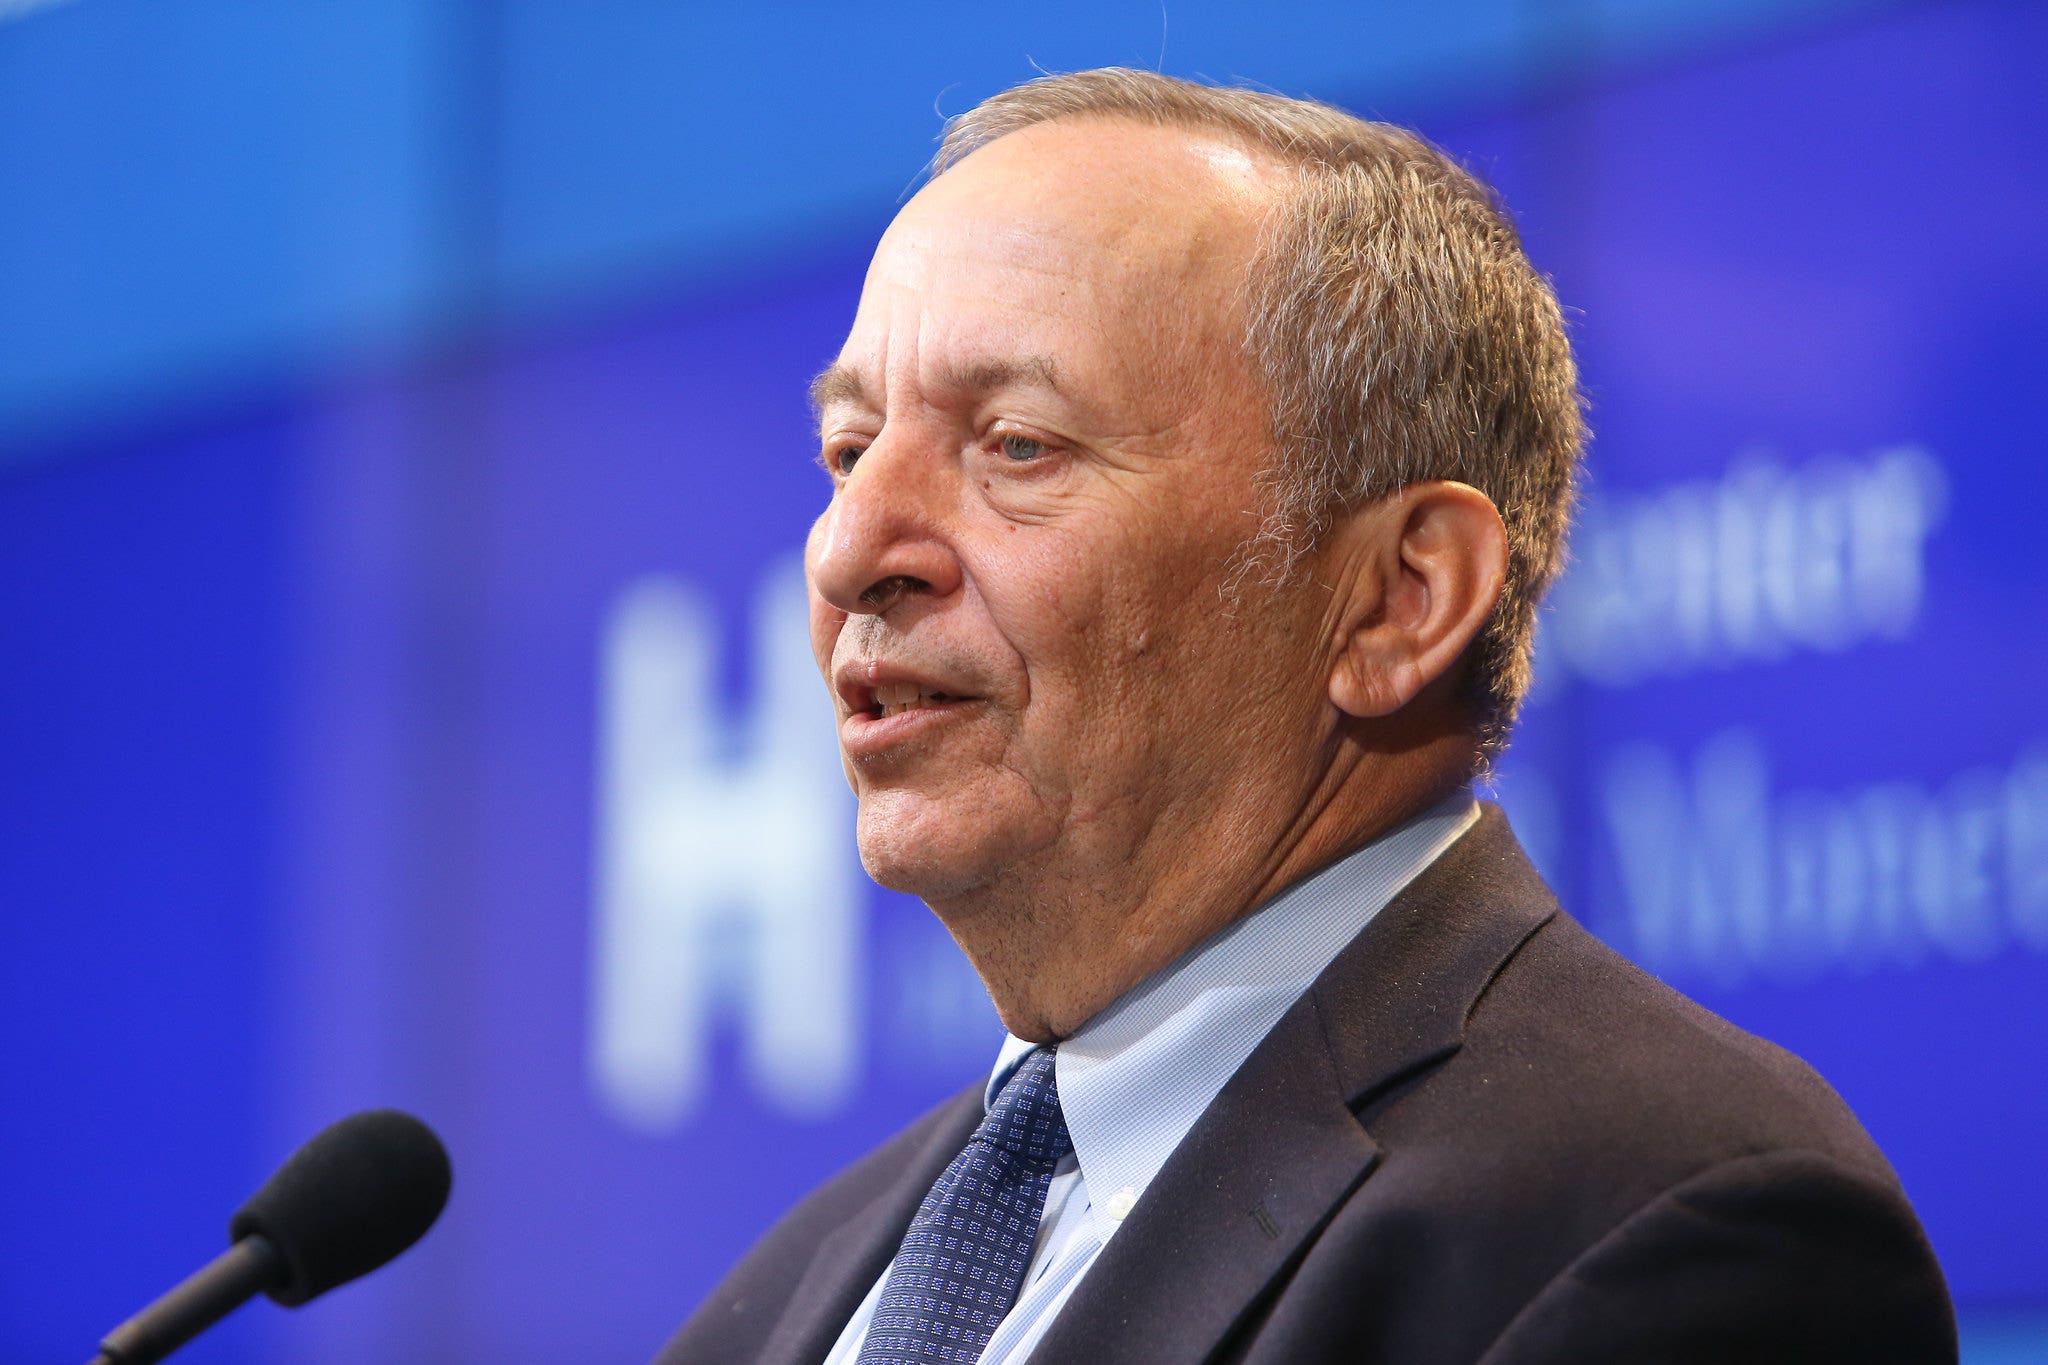 Larry Summers Says US Facing Complex Challenges: 'Curbing Inflation Comes First, But We Can't Stop There'